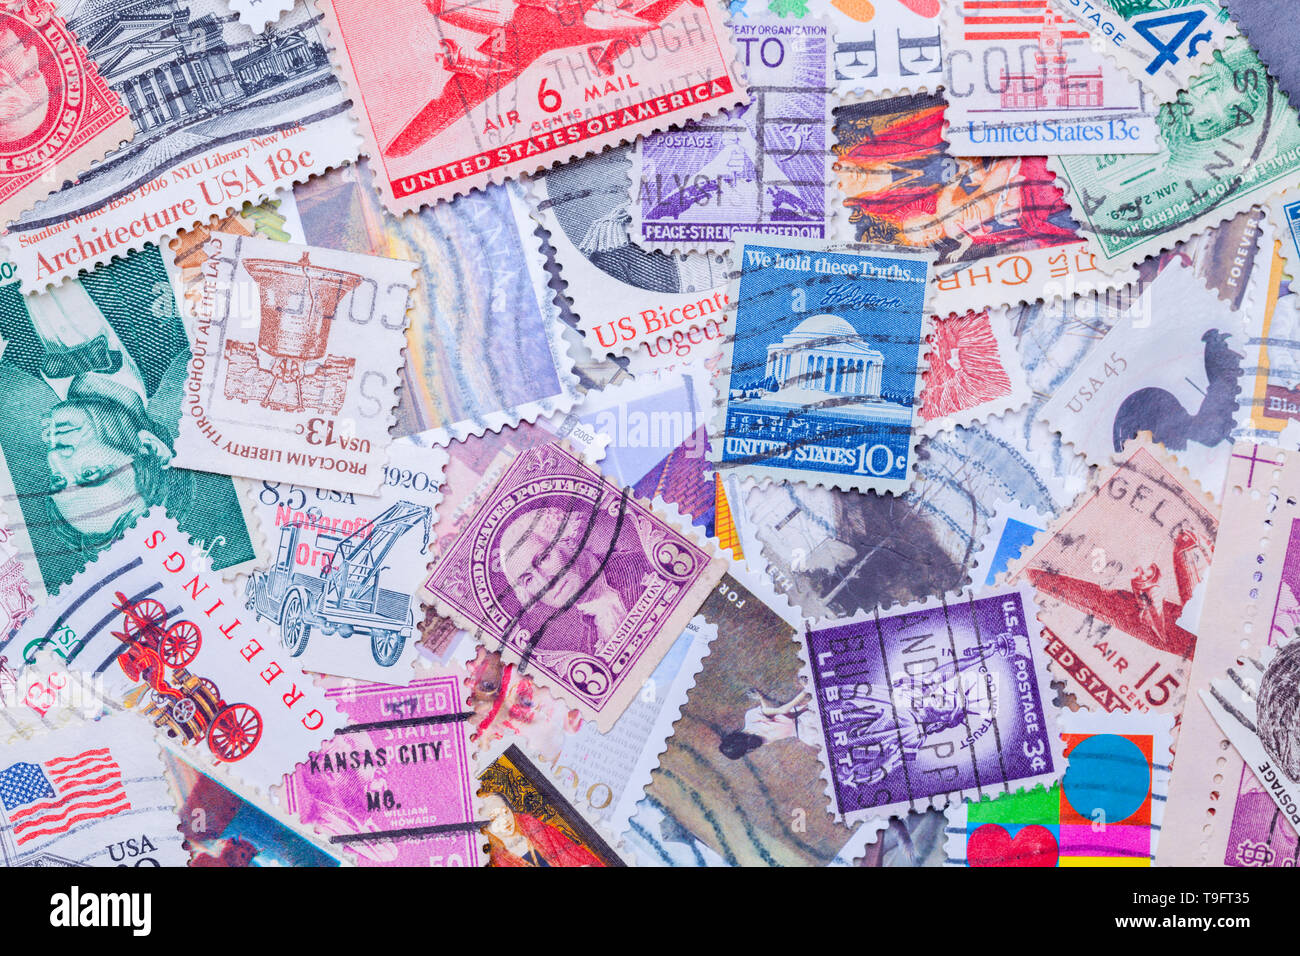 Old Used United States Postage Stamps in a Pile Background. Stock Photo